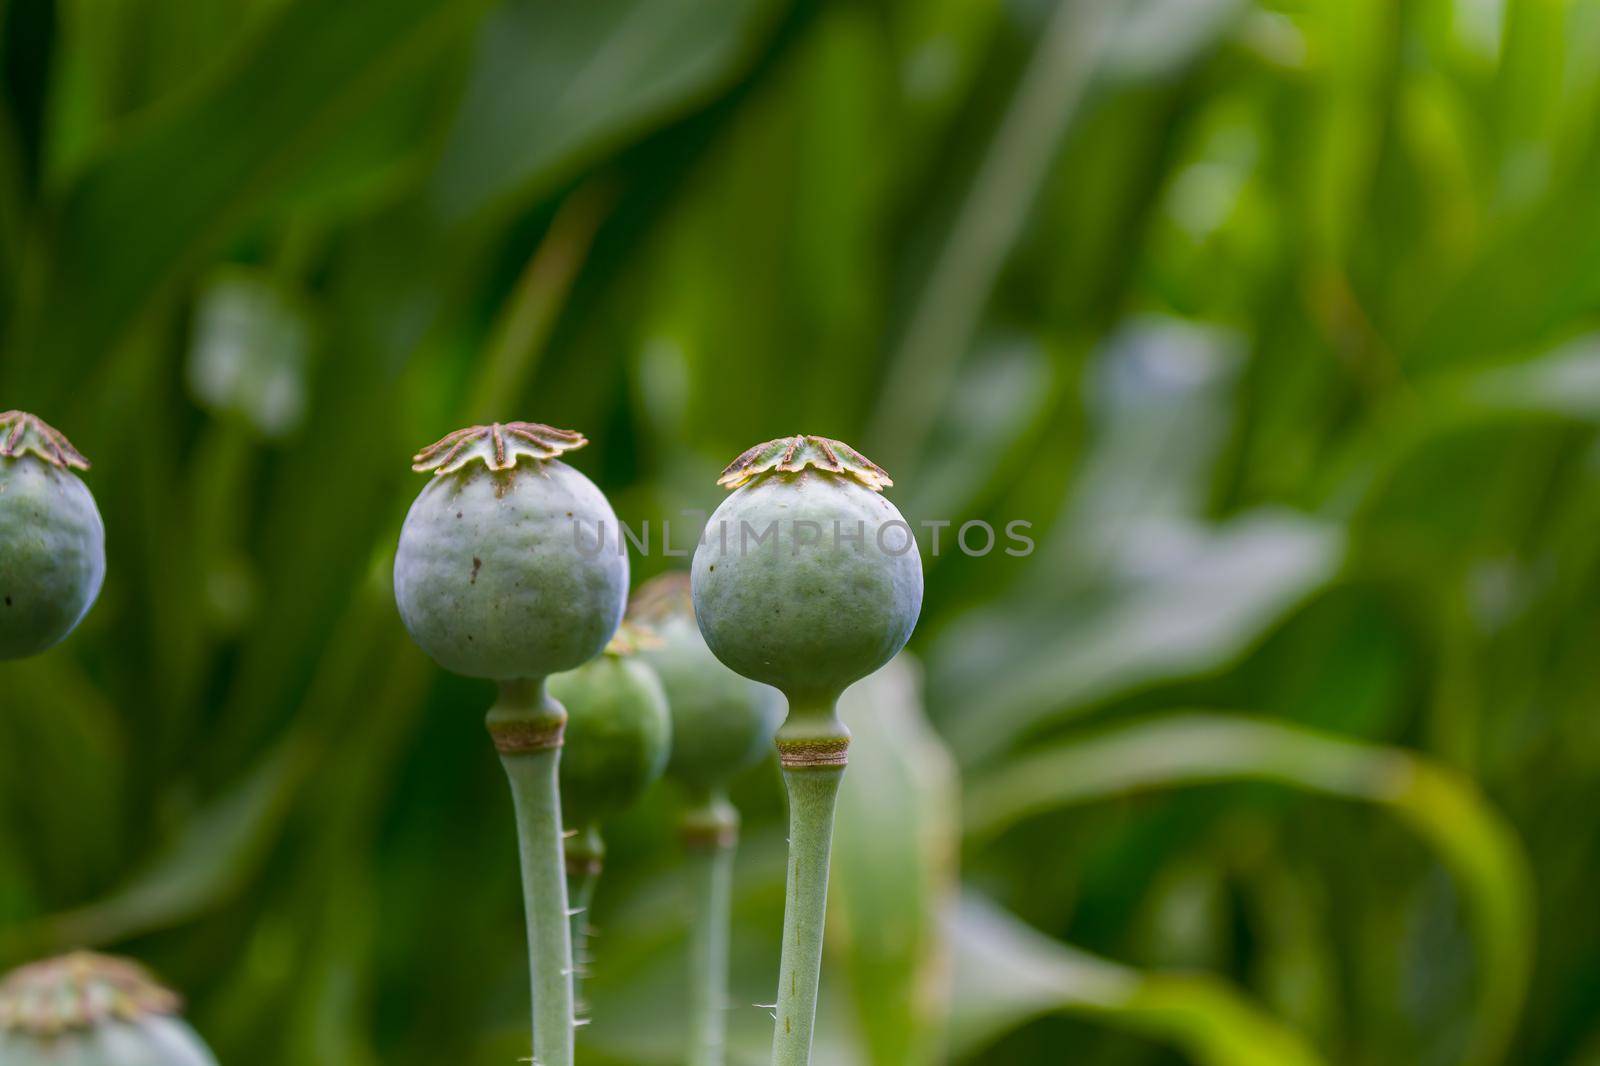 Immature green poppy heads in a field on a green blurred background.